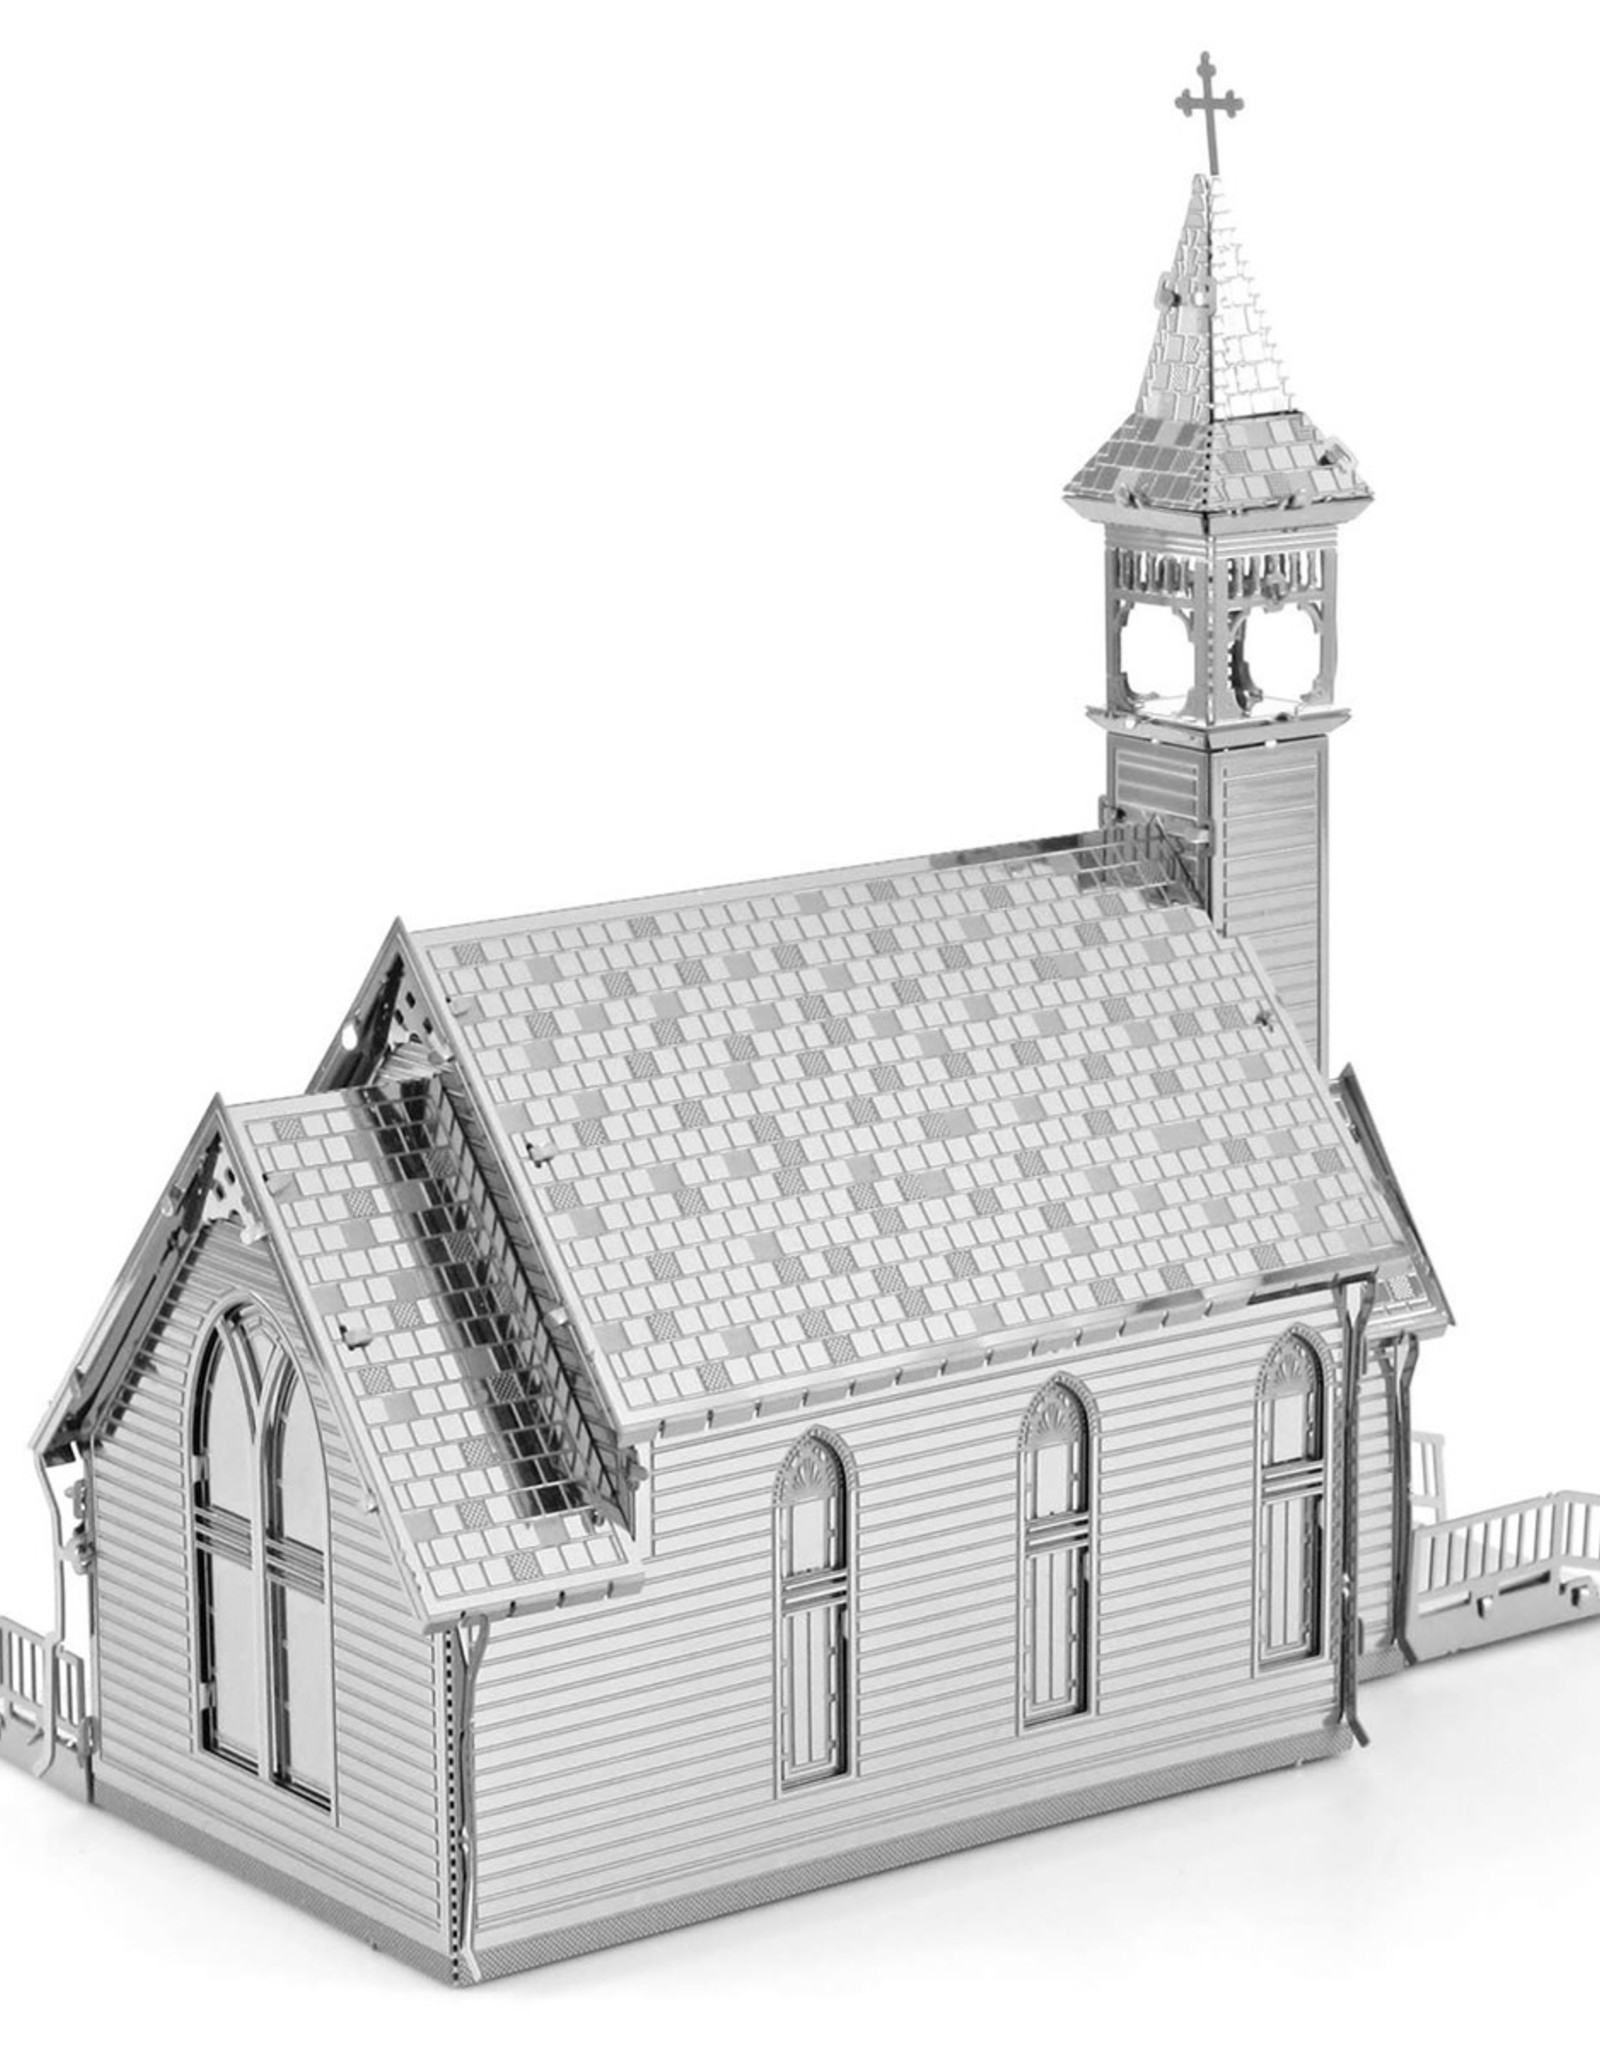 MetalEarth M.E. Old Country Church